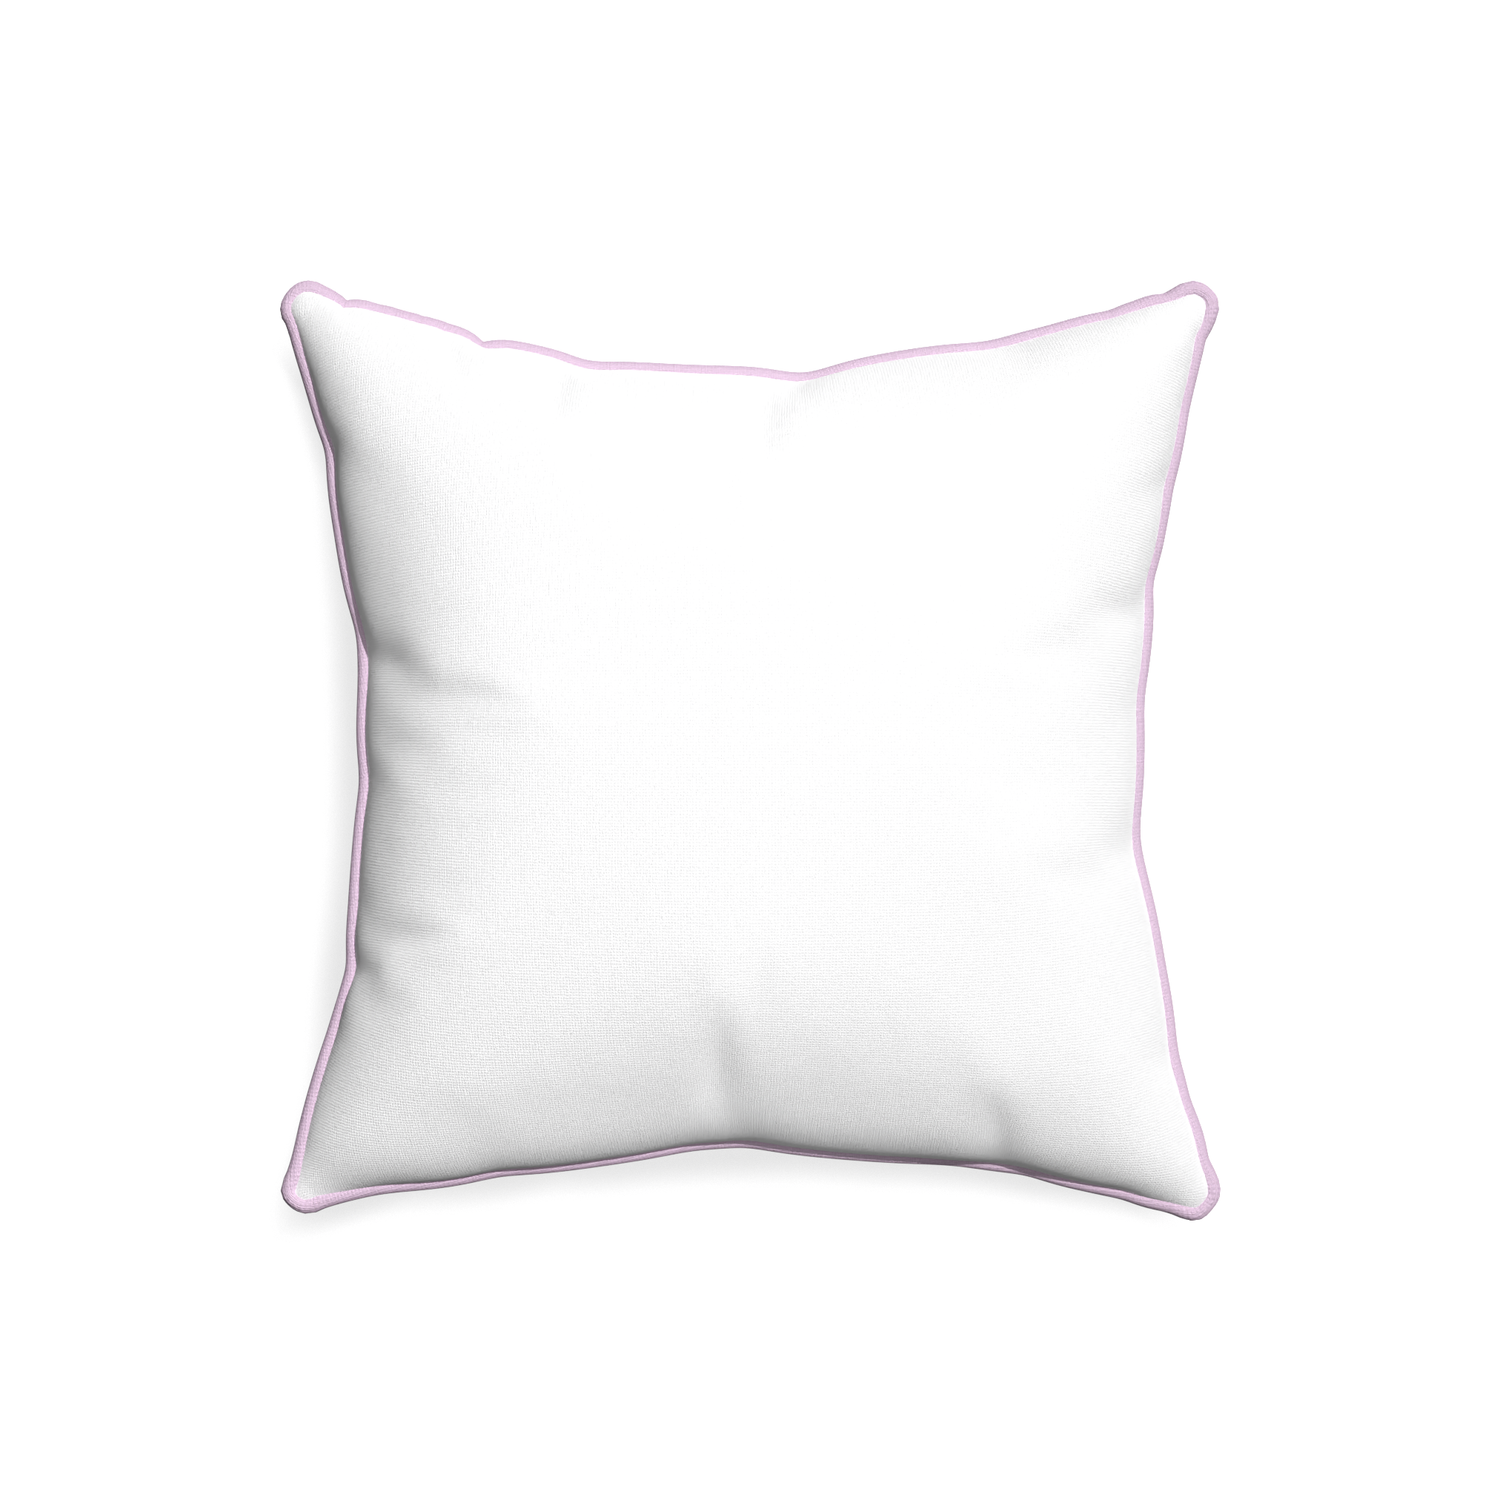 20-square snow custom pillow with l piping on white background